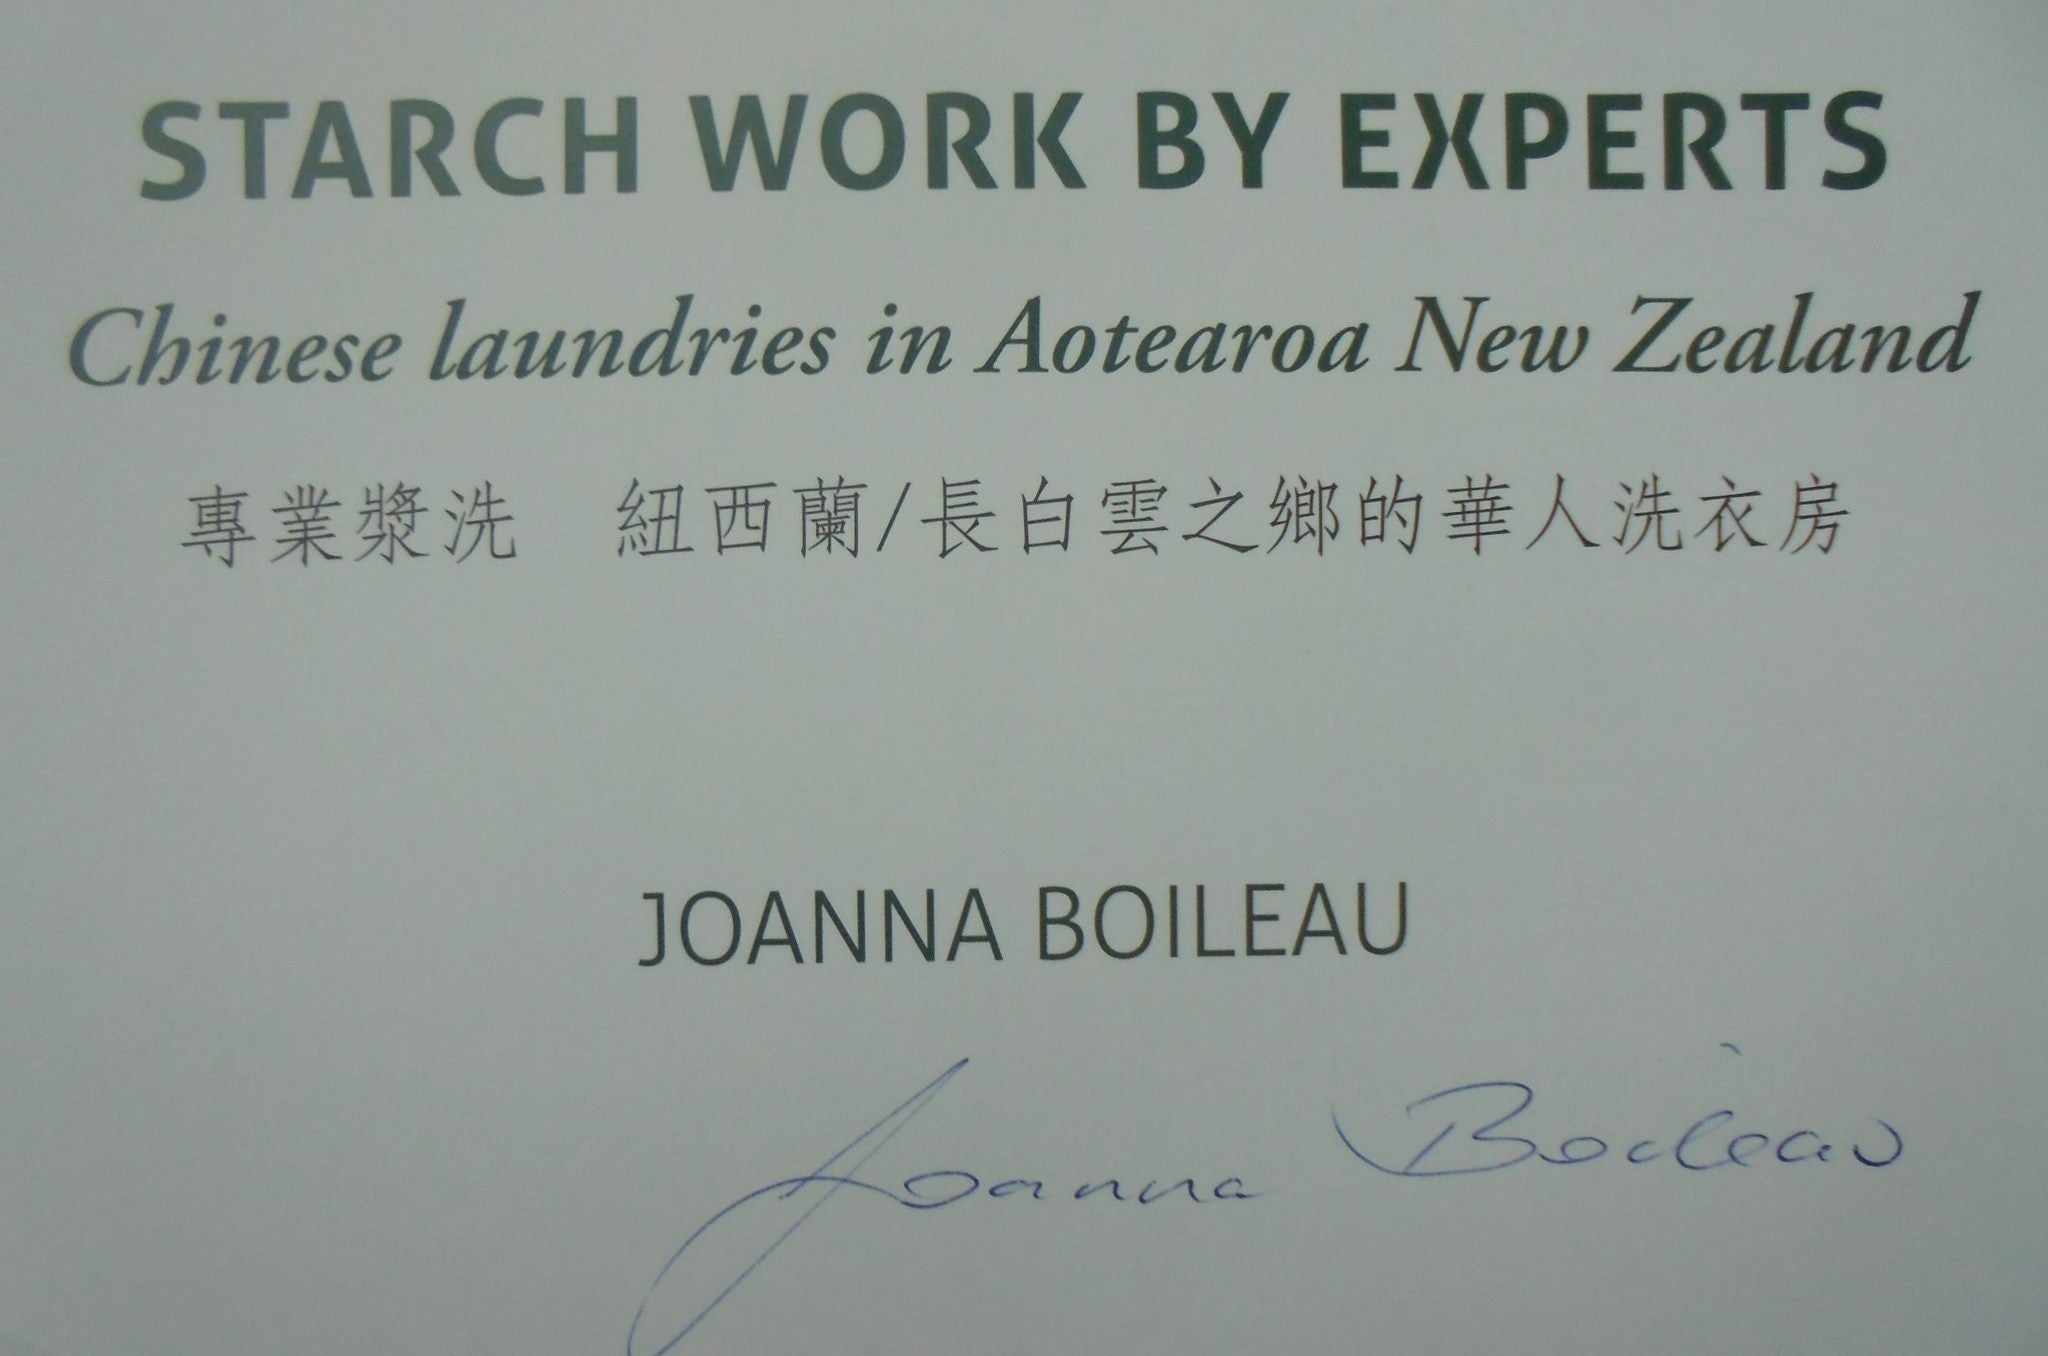 Starch Work Done by Experts. Chinese Laundries in Aotearoa New Zealand. SIGNED